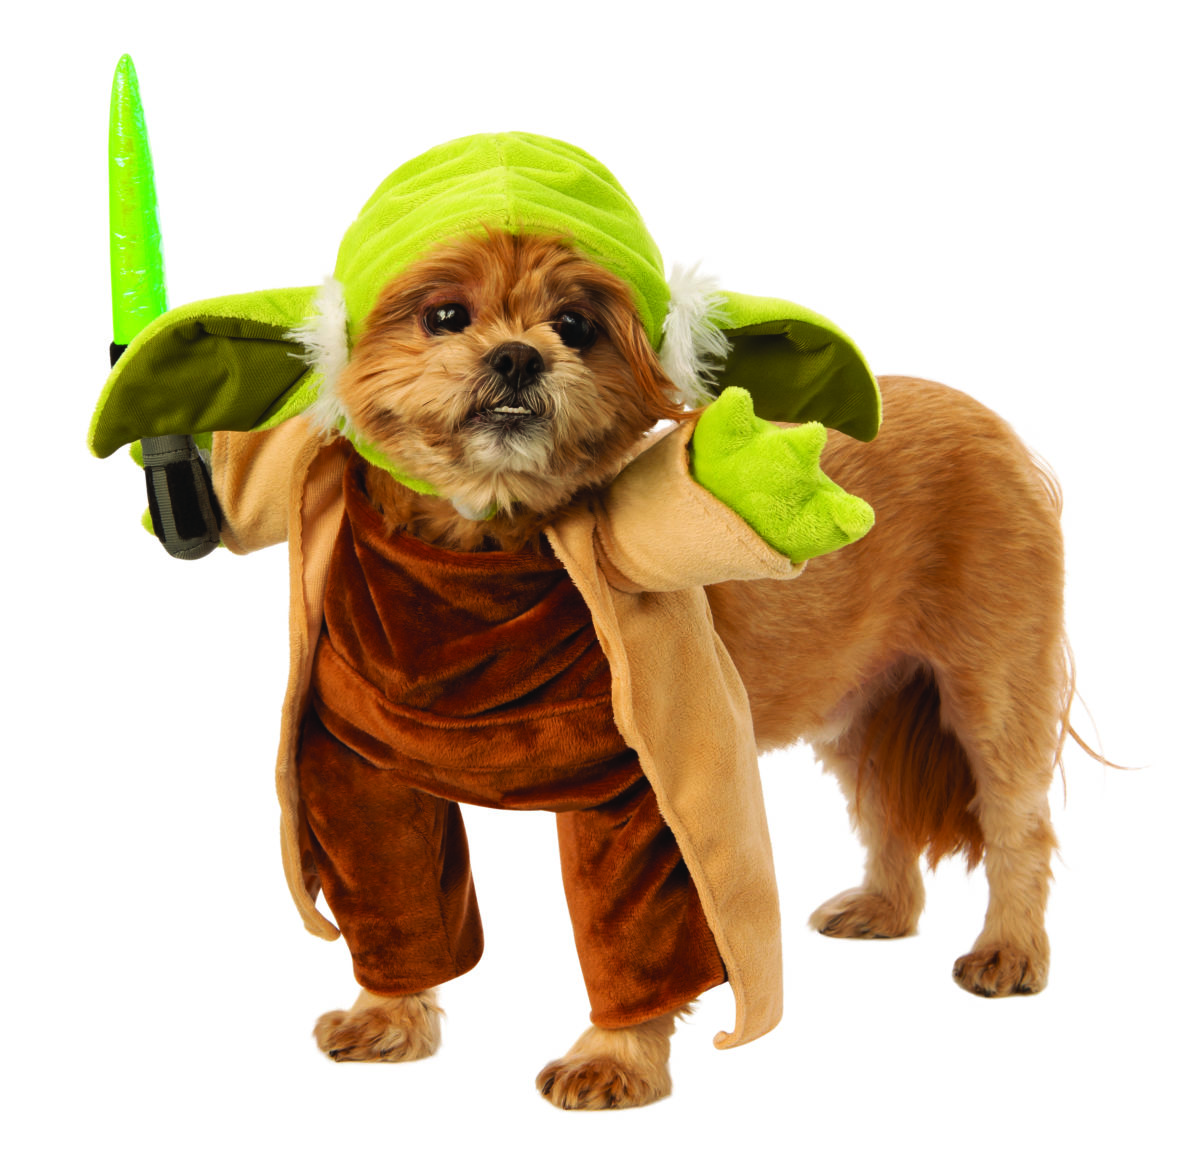 STAR WARS WALKING YODA COSTUME FOR DOGS / CATS